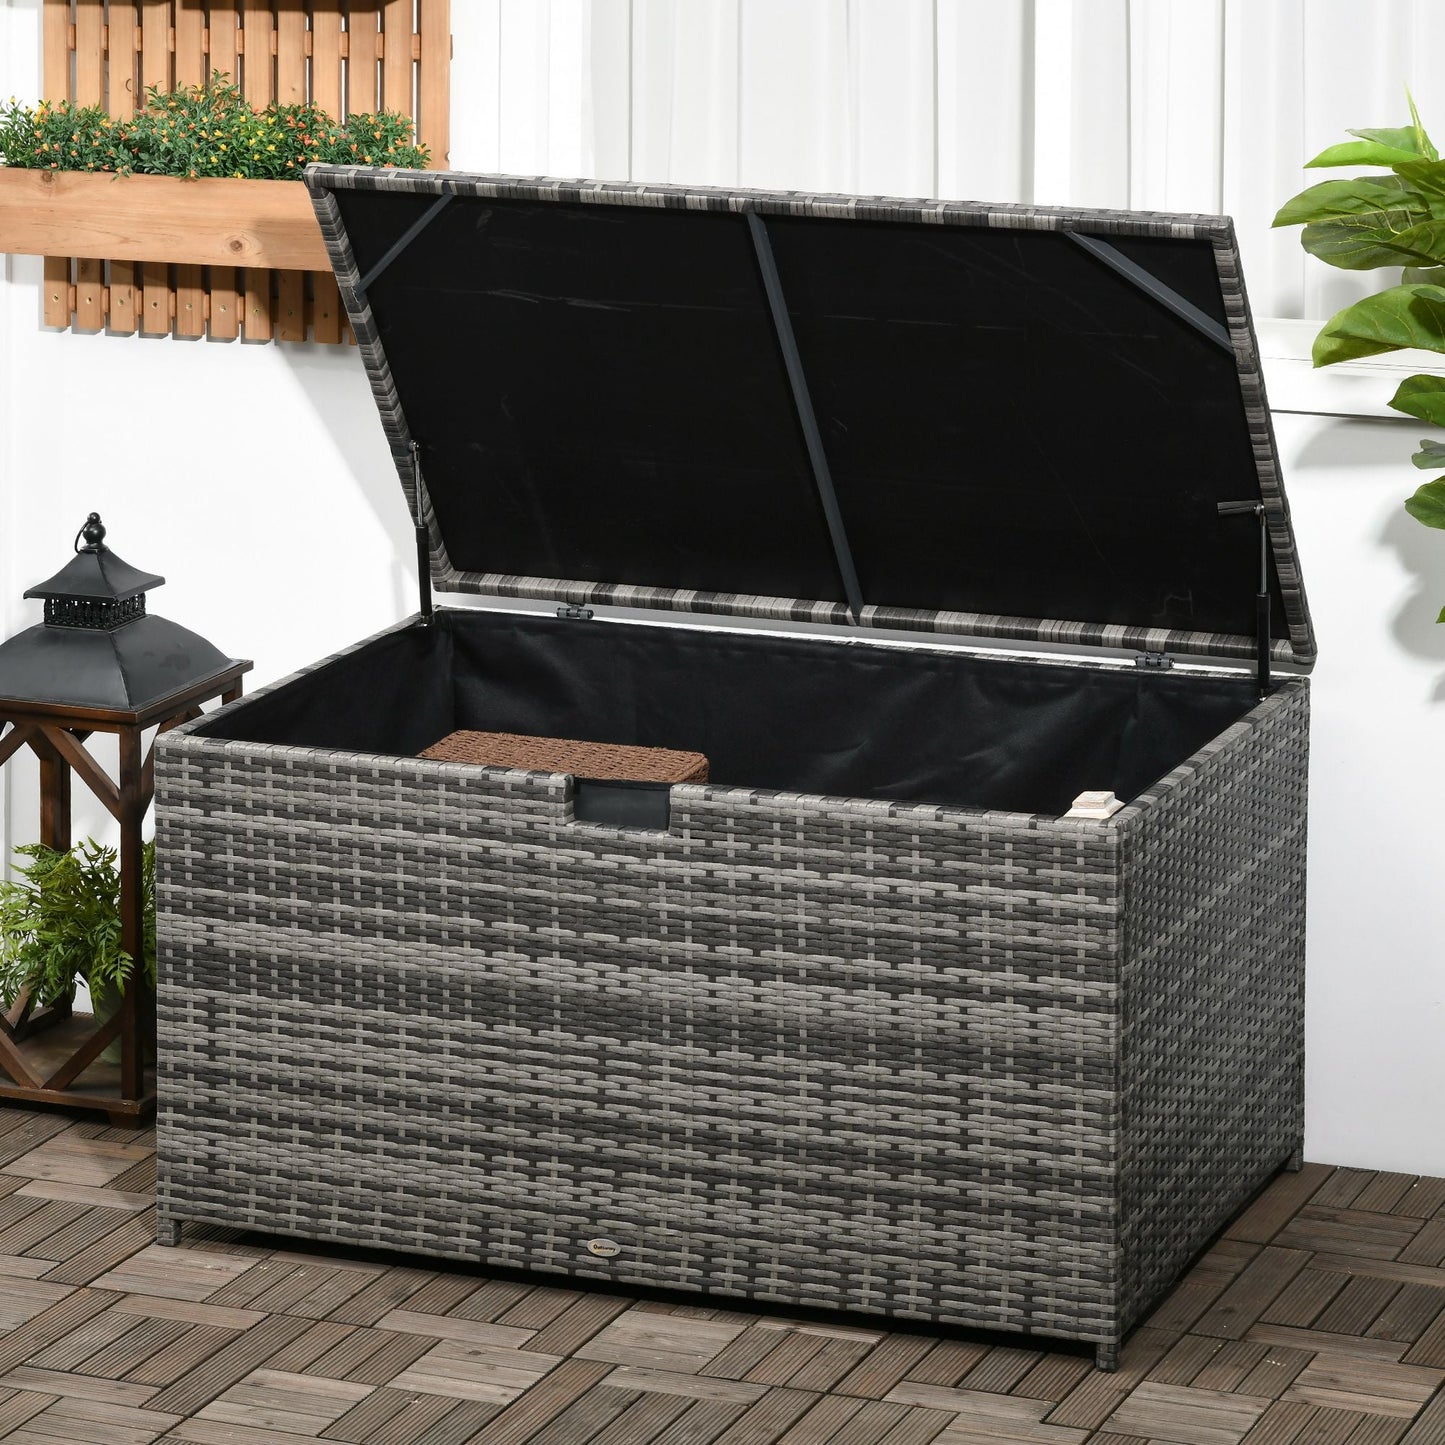 Outdoor and Garden-Outdoor Deck Box, PE Rattan Wicker with Liner, Hydraulic Lift & Handle for Indoor, Outdoor, Patio Furniture, Pool, Toys, Garden Tools, Gray - Outdoor Style Company